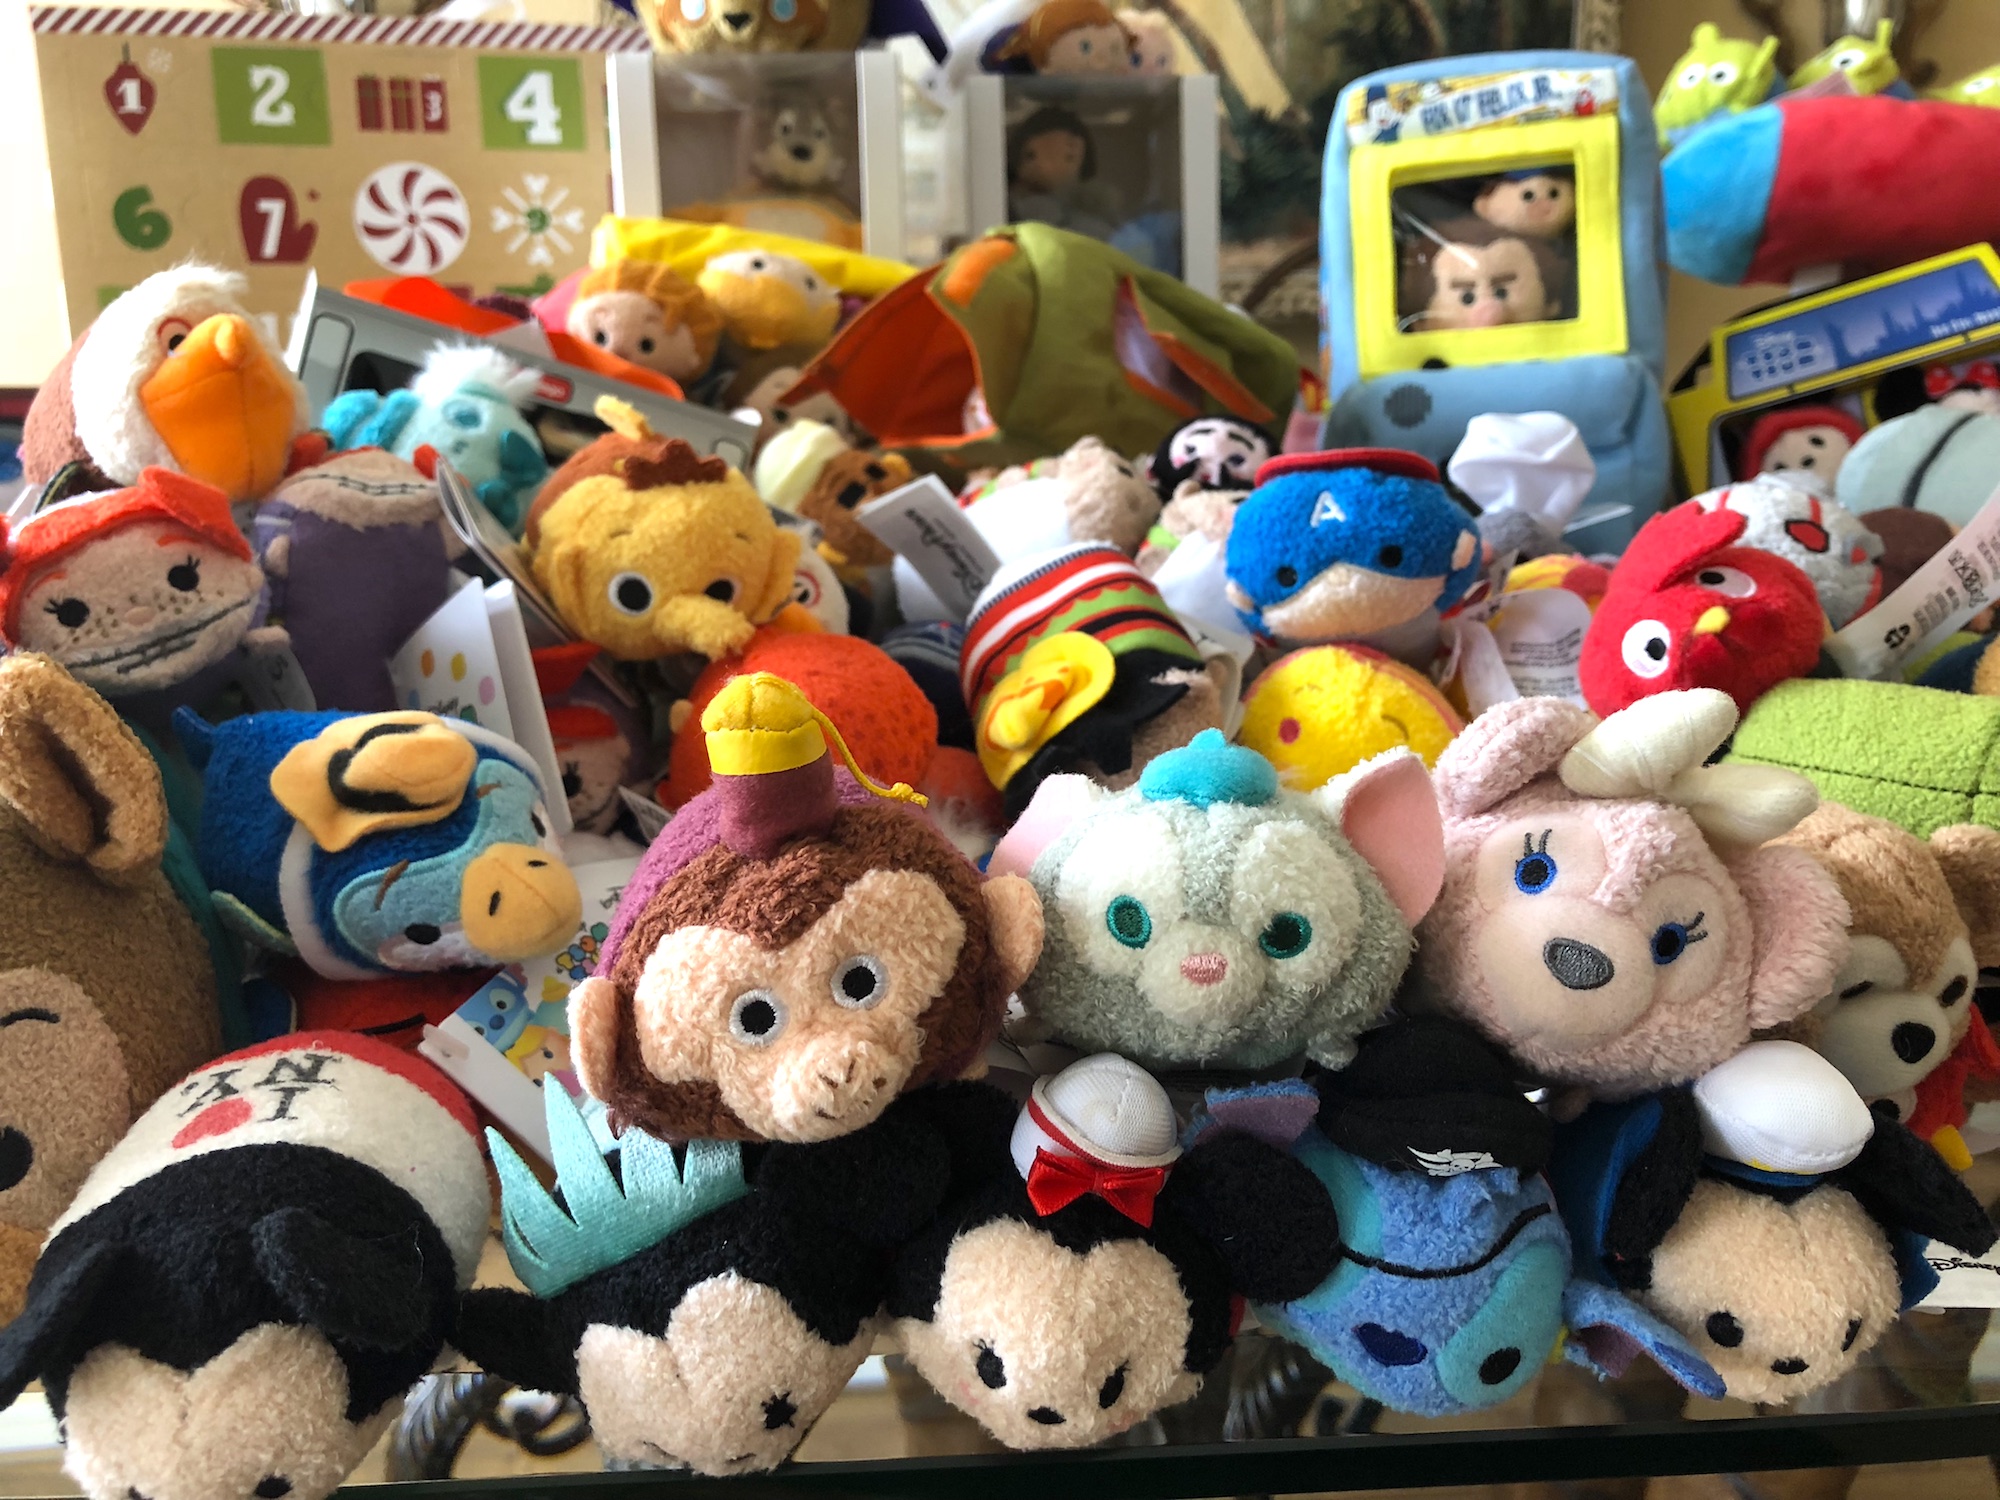 Disney Tsum Tsums - Toy Reviews - The Toy Insider